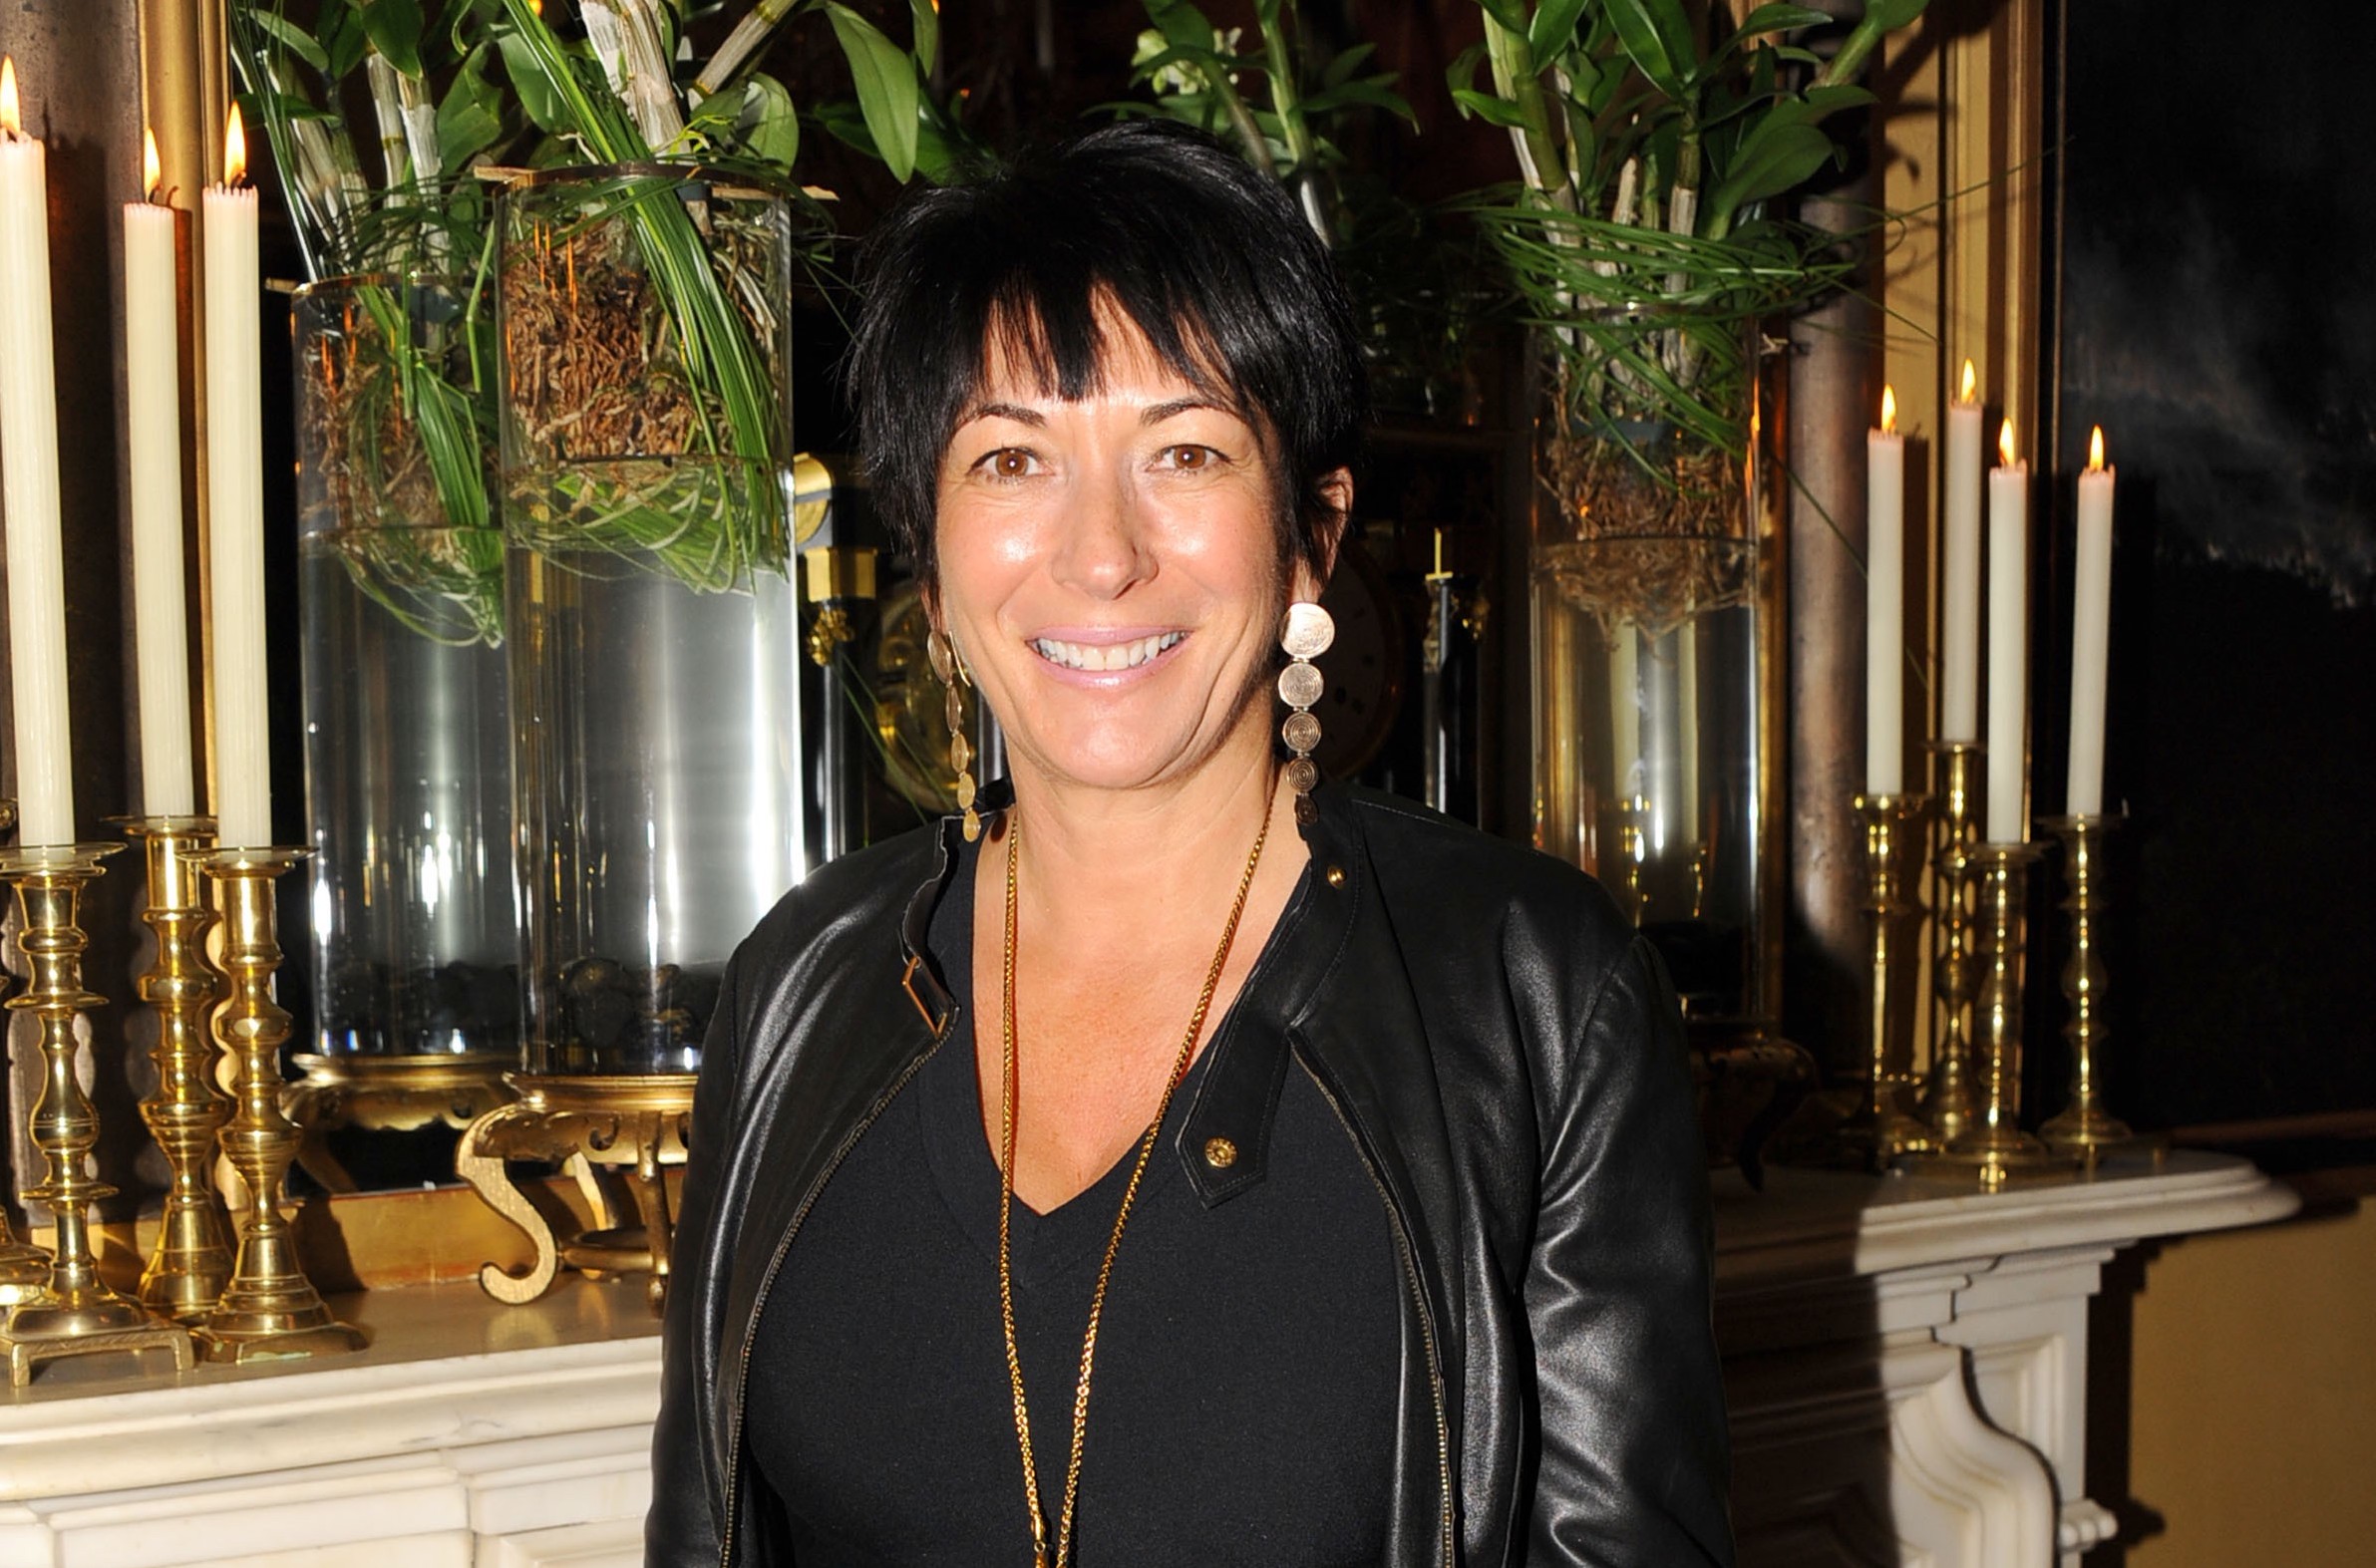 Ghislaine Maxwell attends an event on on October 21, 2013 in New York City. (Paul Bruinooge—Patrick McMullan Archives/Getty Images)